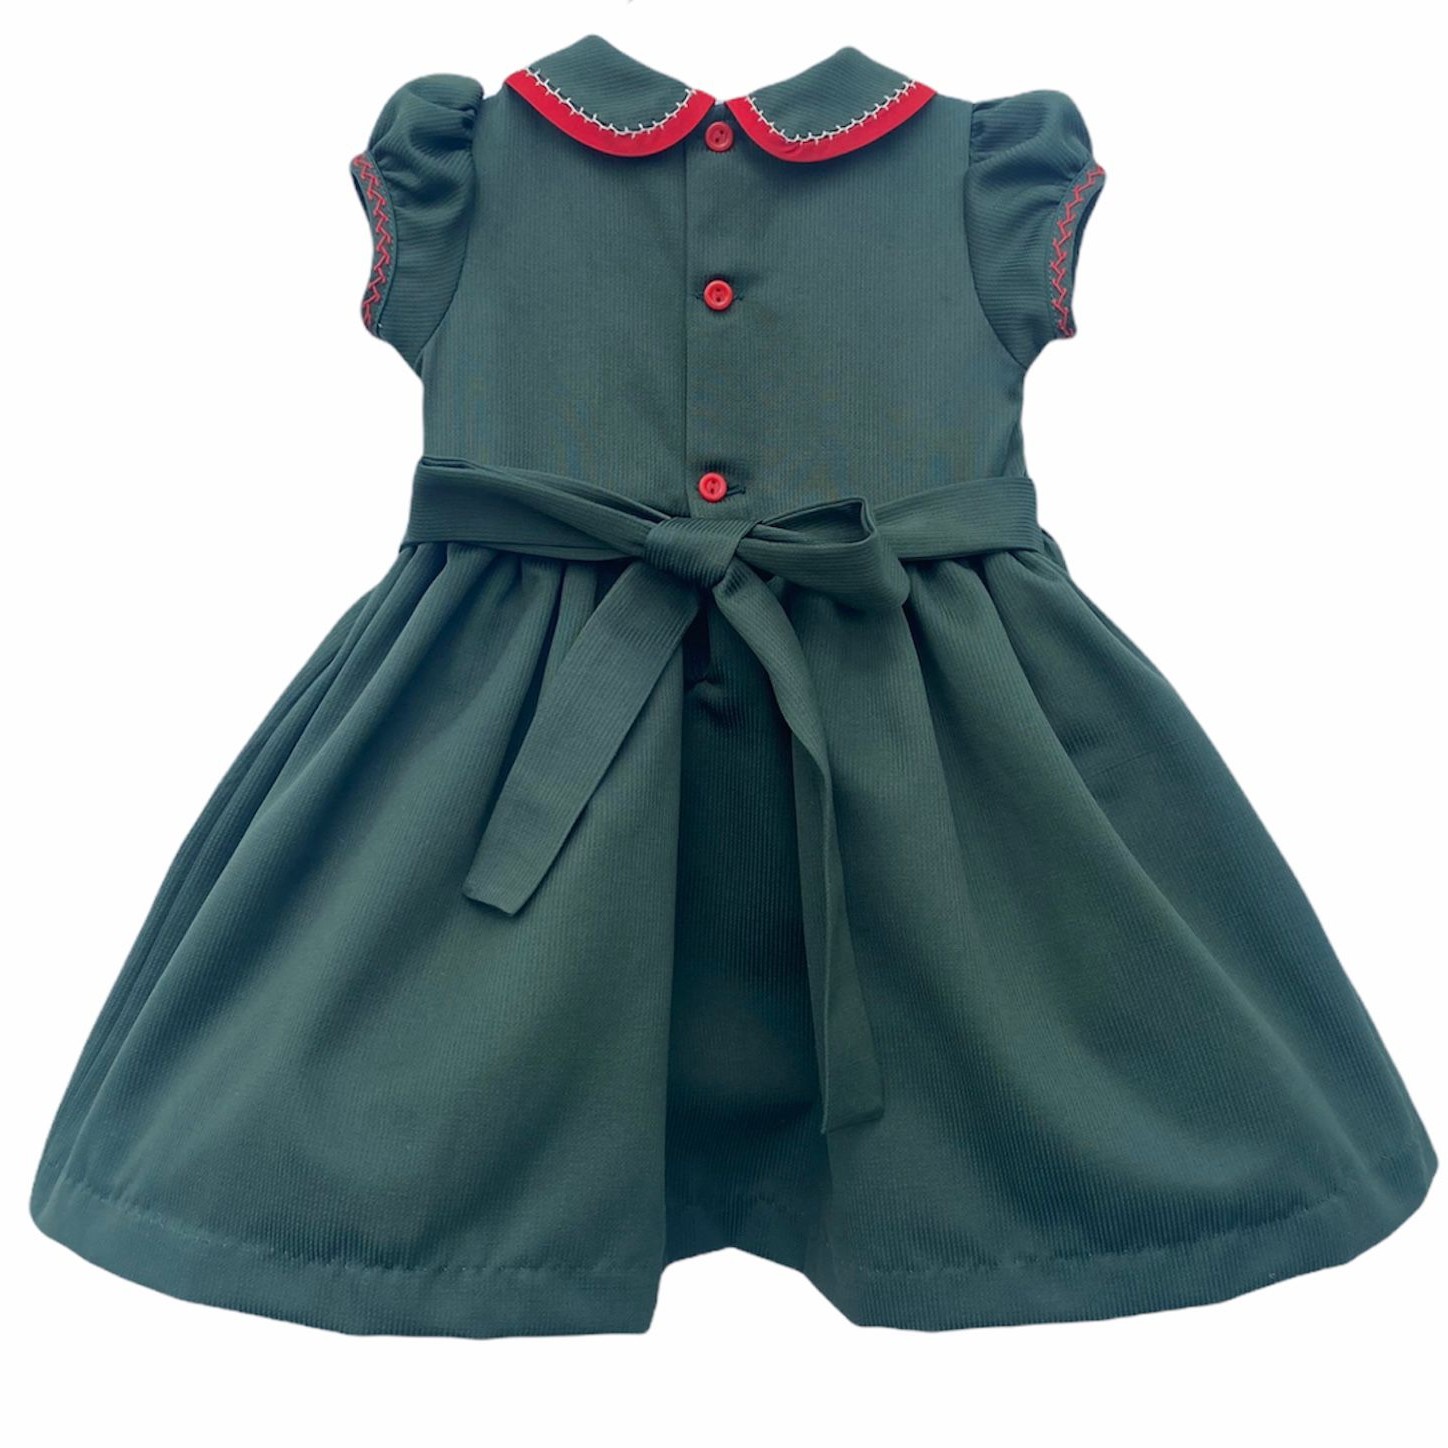 Girl's Dress with Hand Embroidery - Dark Green Color with Red and White